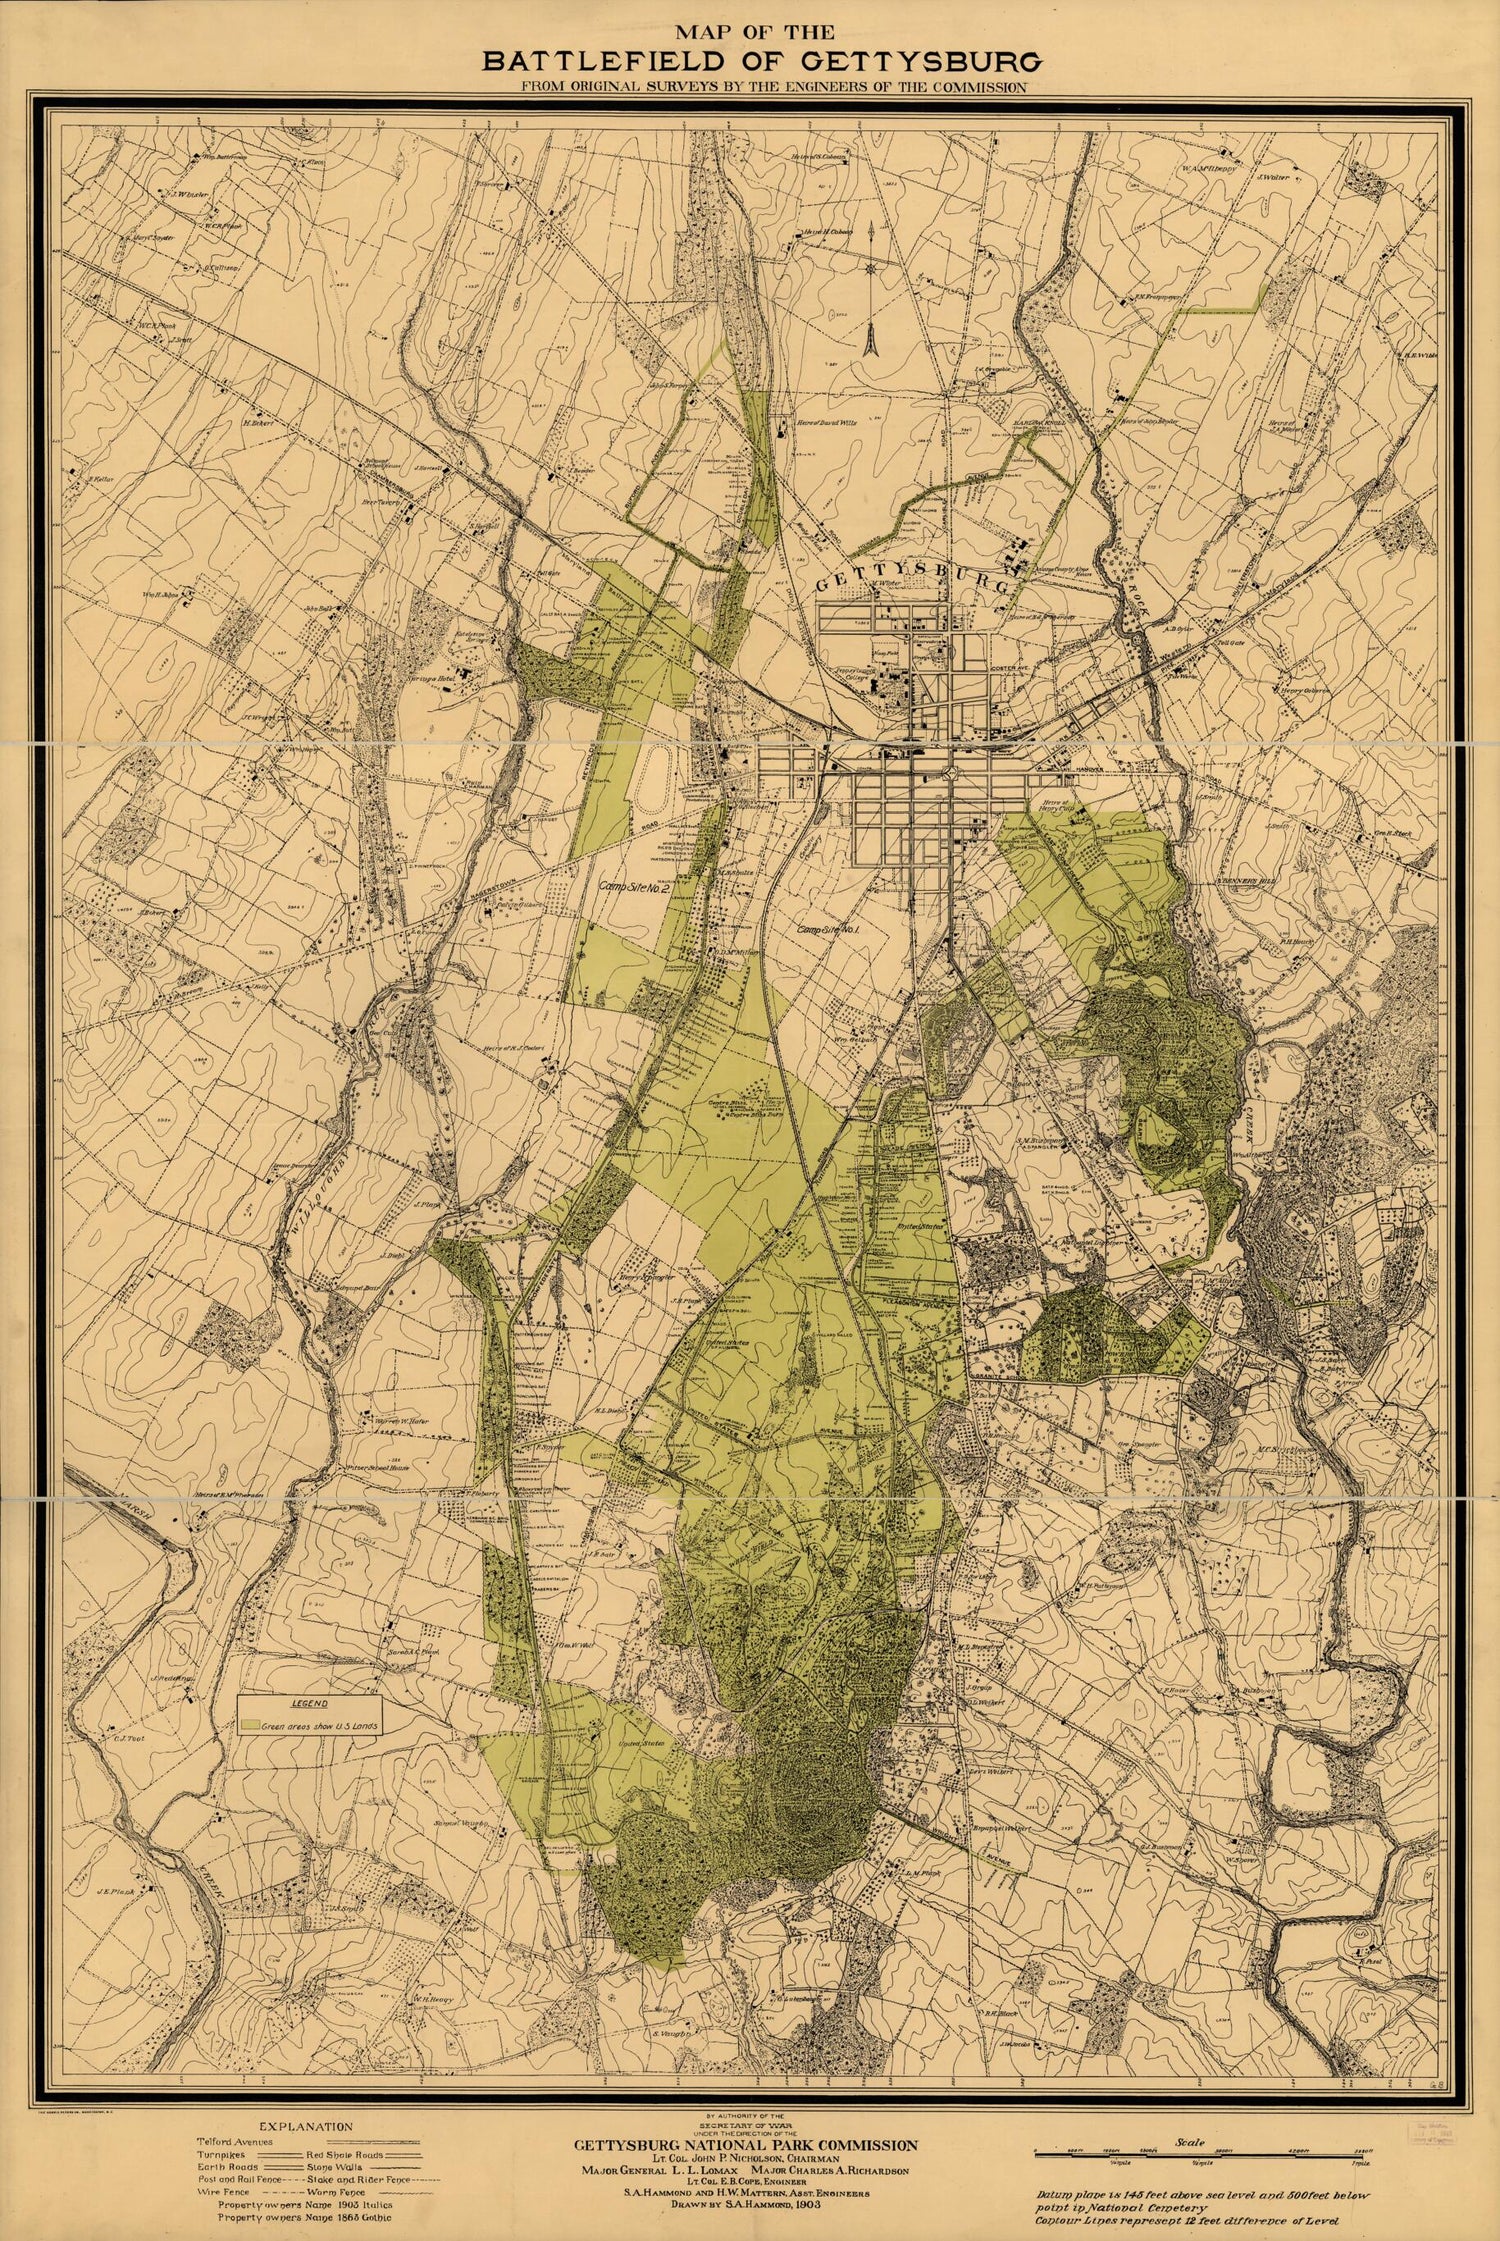 This old map of Map of the Battlefield of Gettysburg from Original Surveys by the Engineers of the Commission from 1903 was created by  Gettysburg National Military Park Commission in 1903